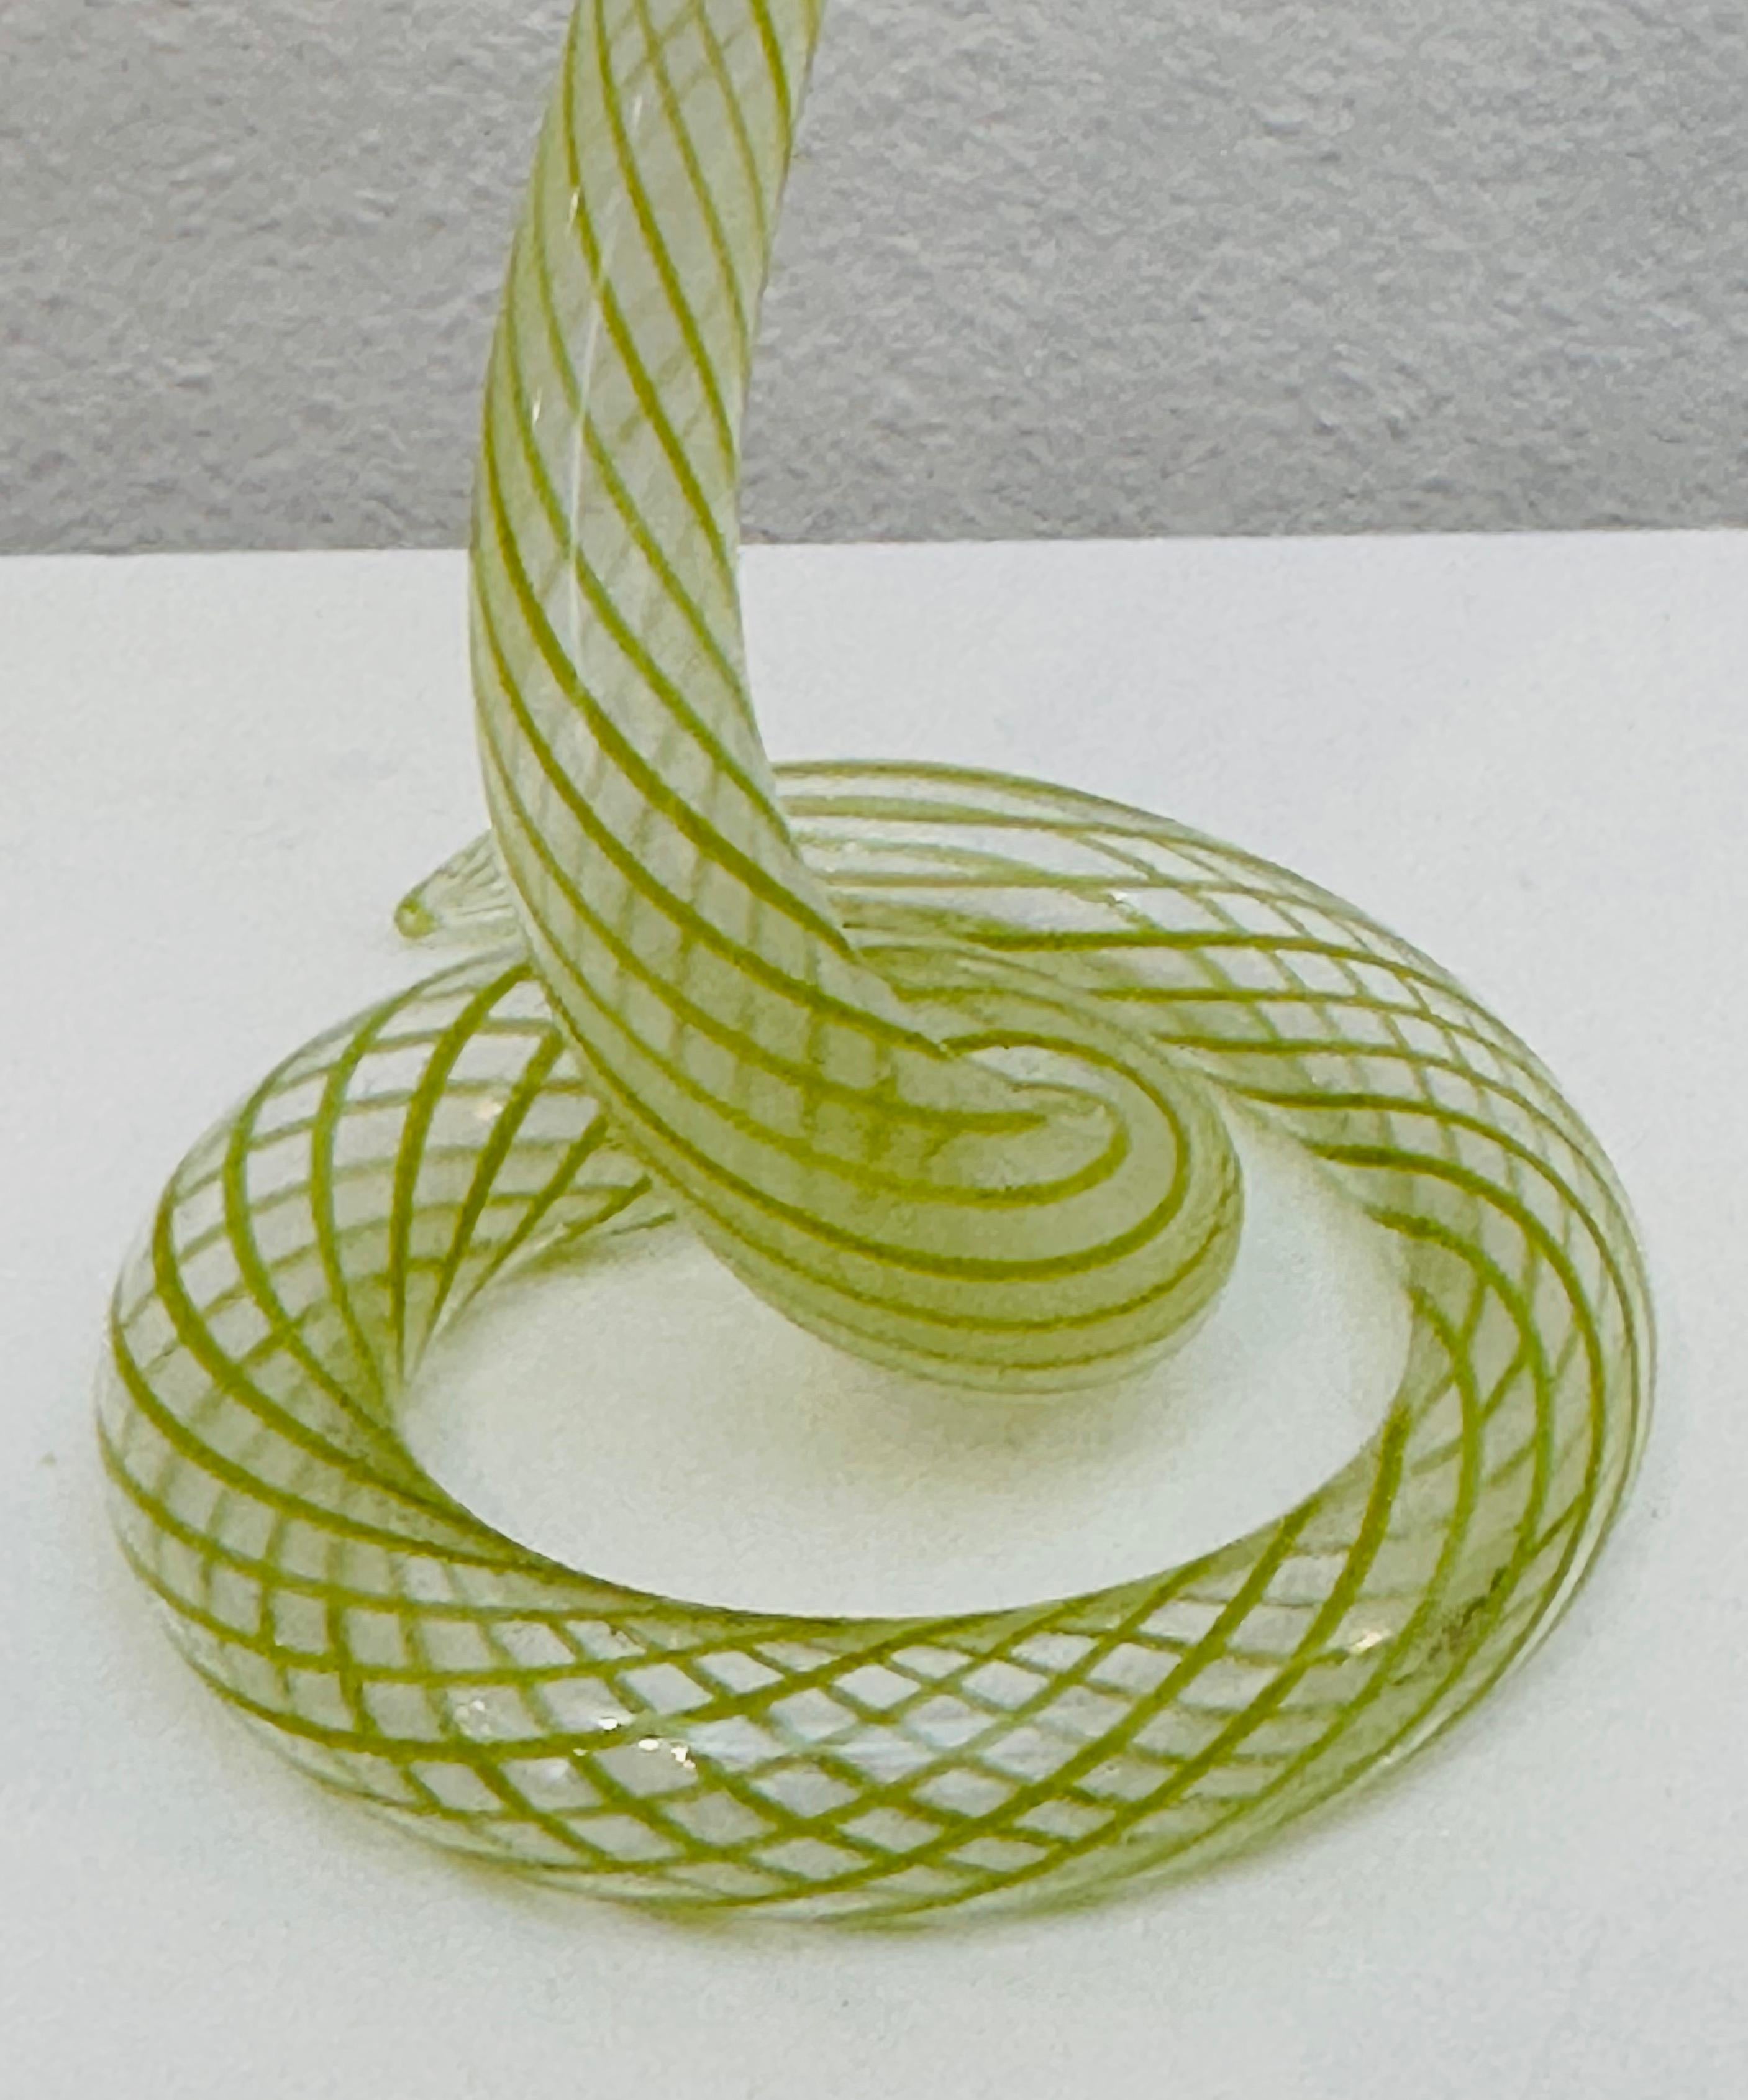 1930s Art Deco Bimini or Lauscha Lampworked Lime Green Striped Snake Glass Vase 10